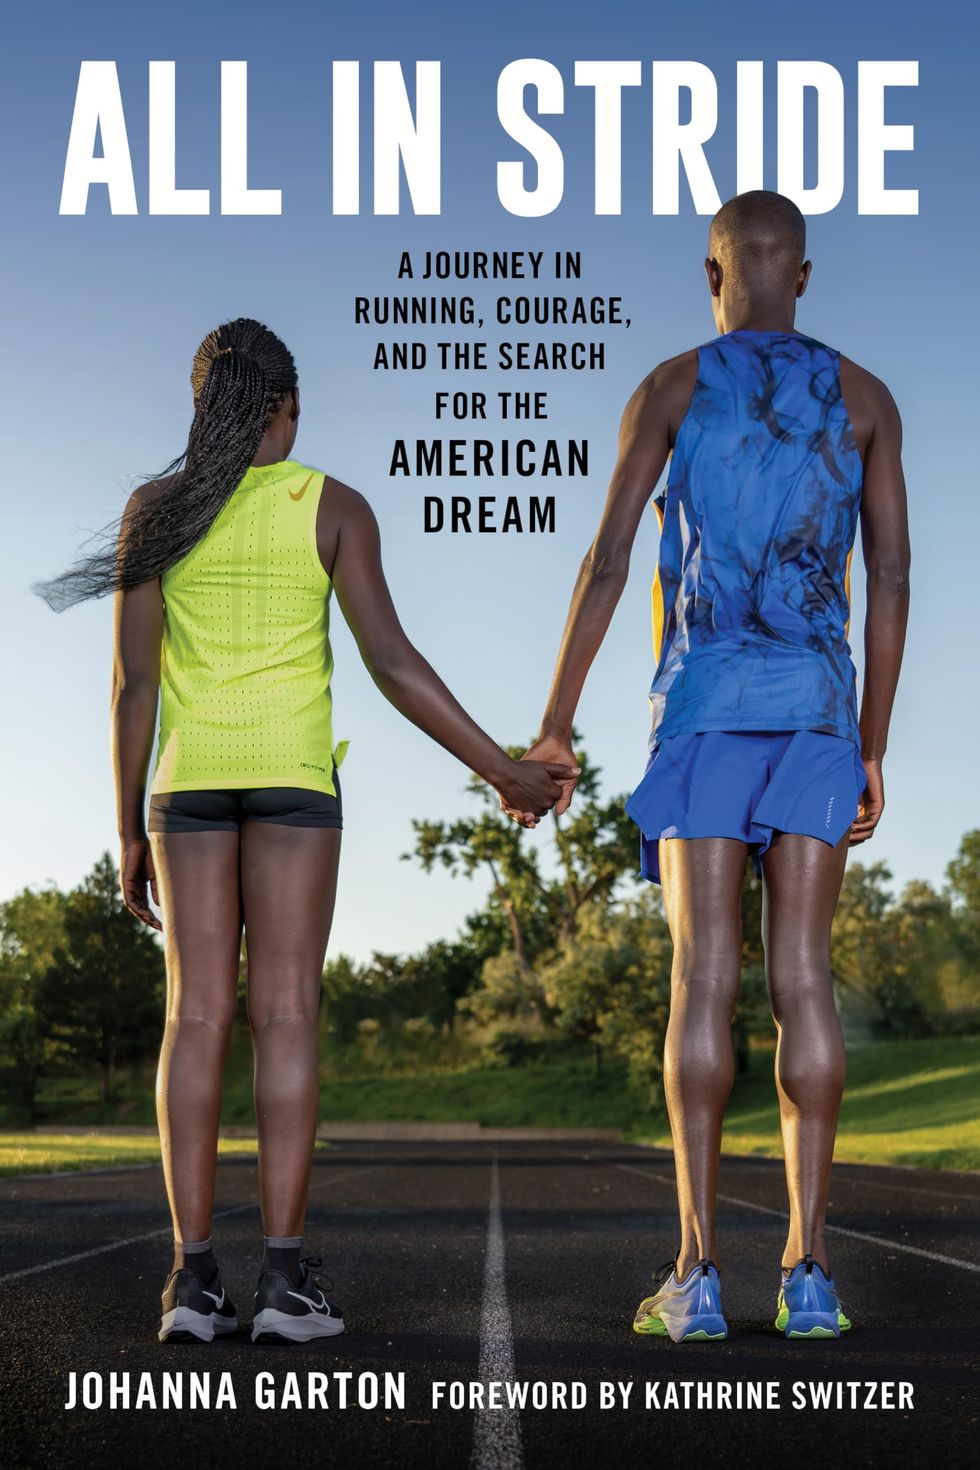 'All in Stride: A Journey in Running, Courage, and the Search for the American Dream' by Johanna Garton